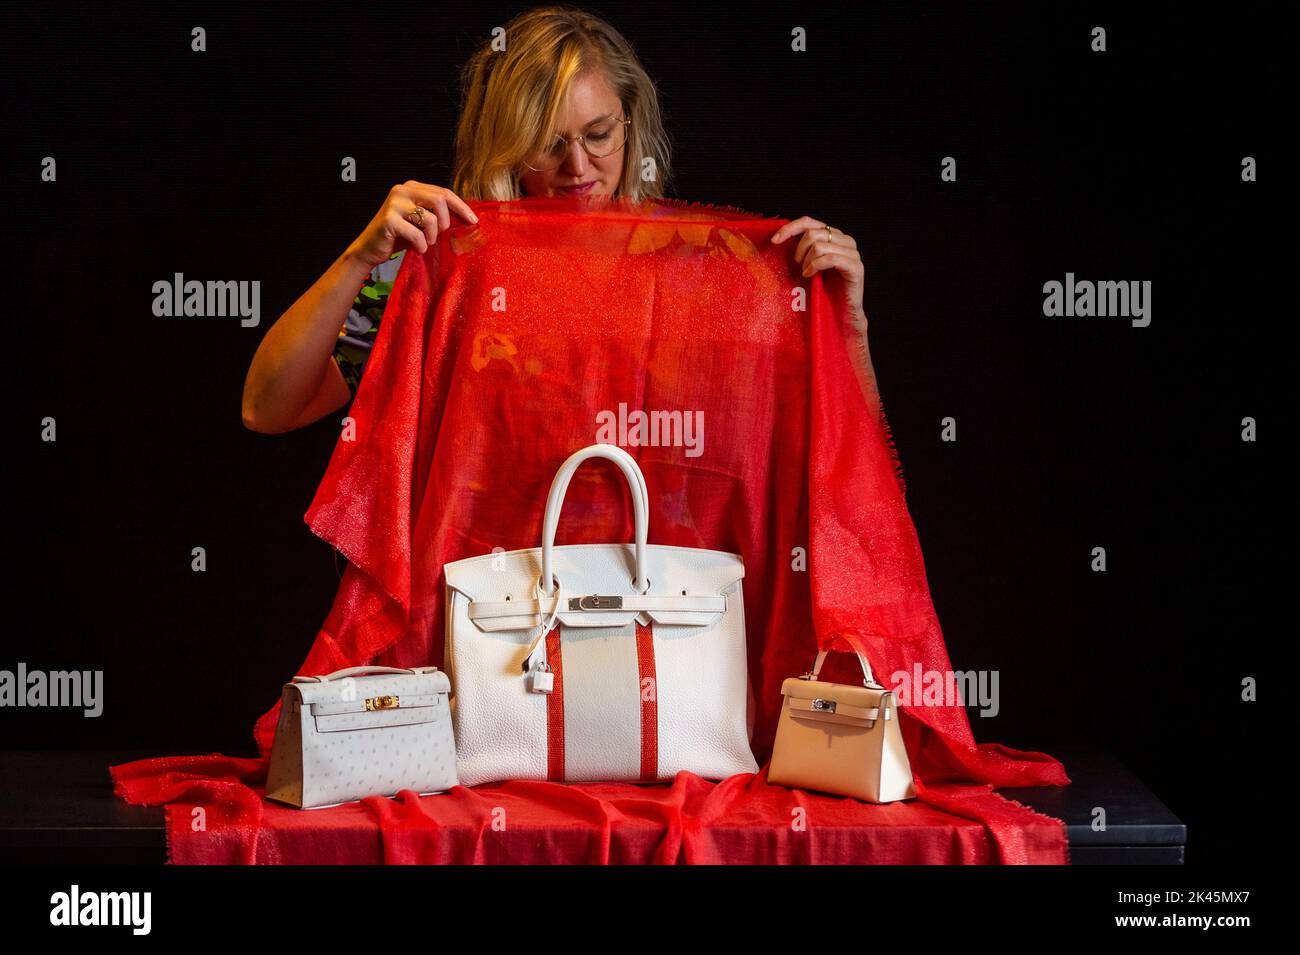 London, UK. 30 September 2022. A staff member reveals (C) a Hermès: a White, Gris Perle Clemence Leather and Sanguine Lizard Club Birkin 35, Limited Edition 2011, (Est. £10,000 - £15,000) at a preview of Bonhams upcoming Designer Handbags and Fashion sale.  More than 250 lots across bags, ready to wear and costume jewellery, including items from Hermès, Louis Vuitton, Chanel, and Dior, will be auctioned at Bonhams Knightsbridge galleries on 4 October.  Credit: Stephen Chung / Alamy Live News Stock Photo